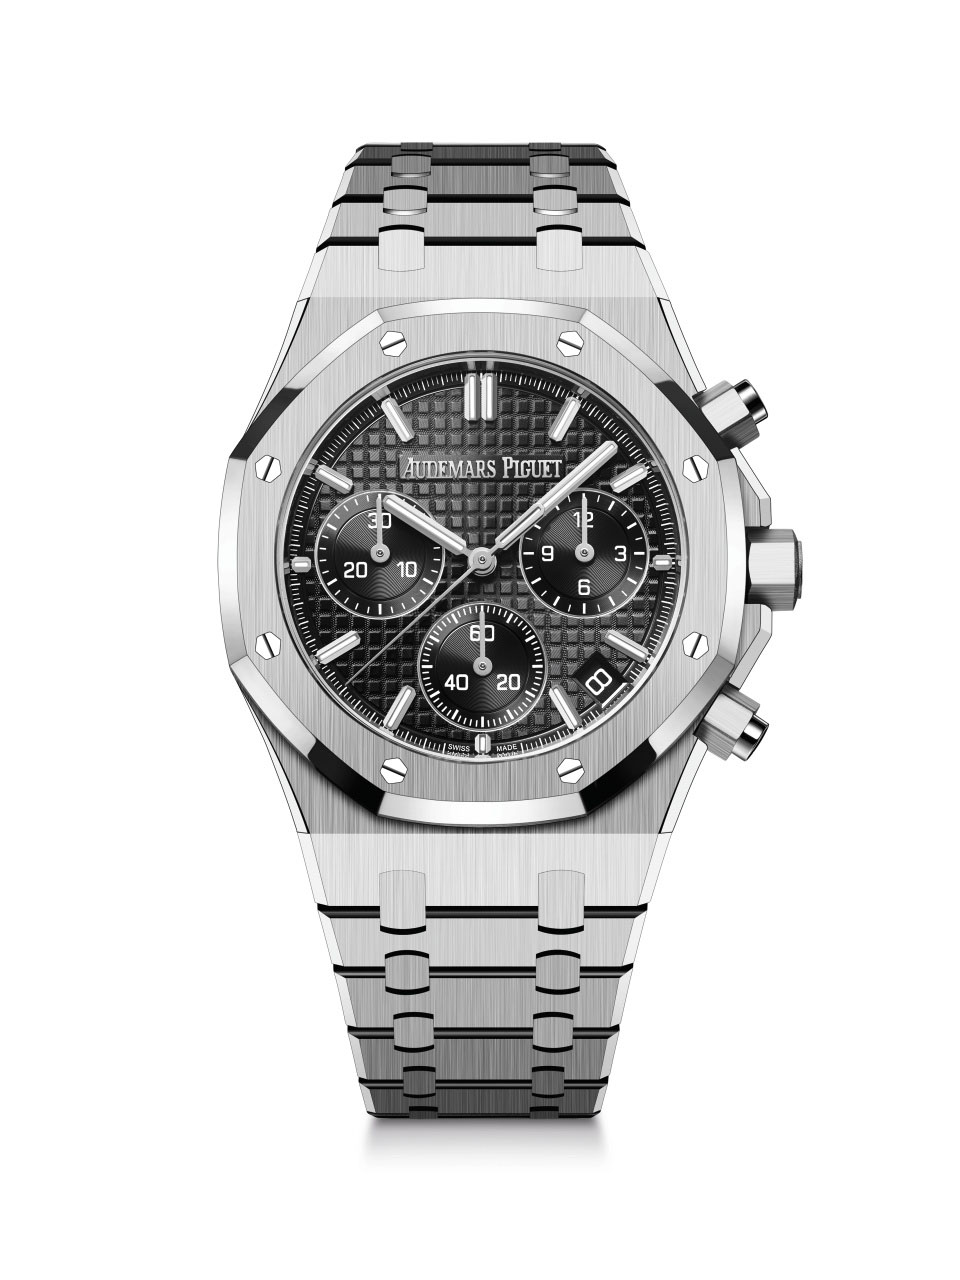 Royal Oak Selfwinding Chronograph / 41mm; stainless steel case with black dial (26240ST.OO.1320ST.02)